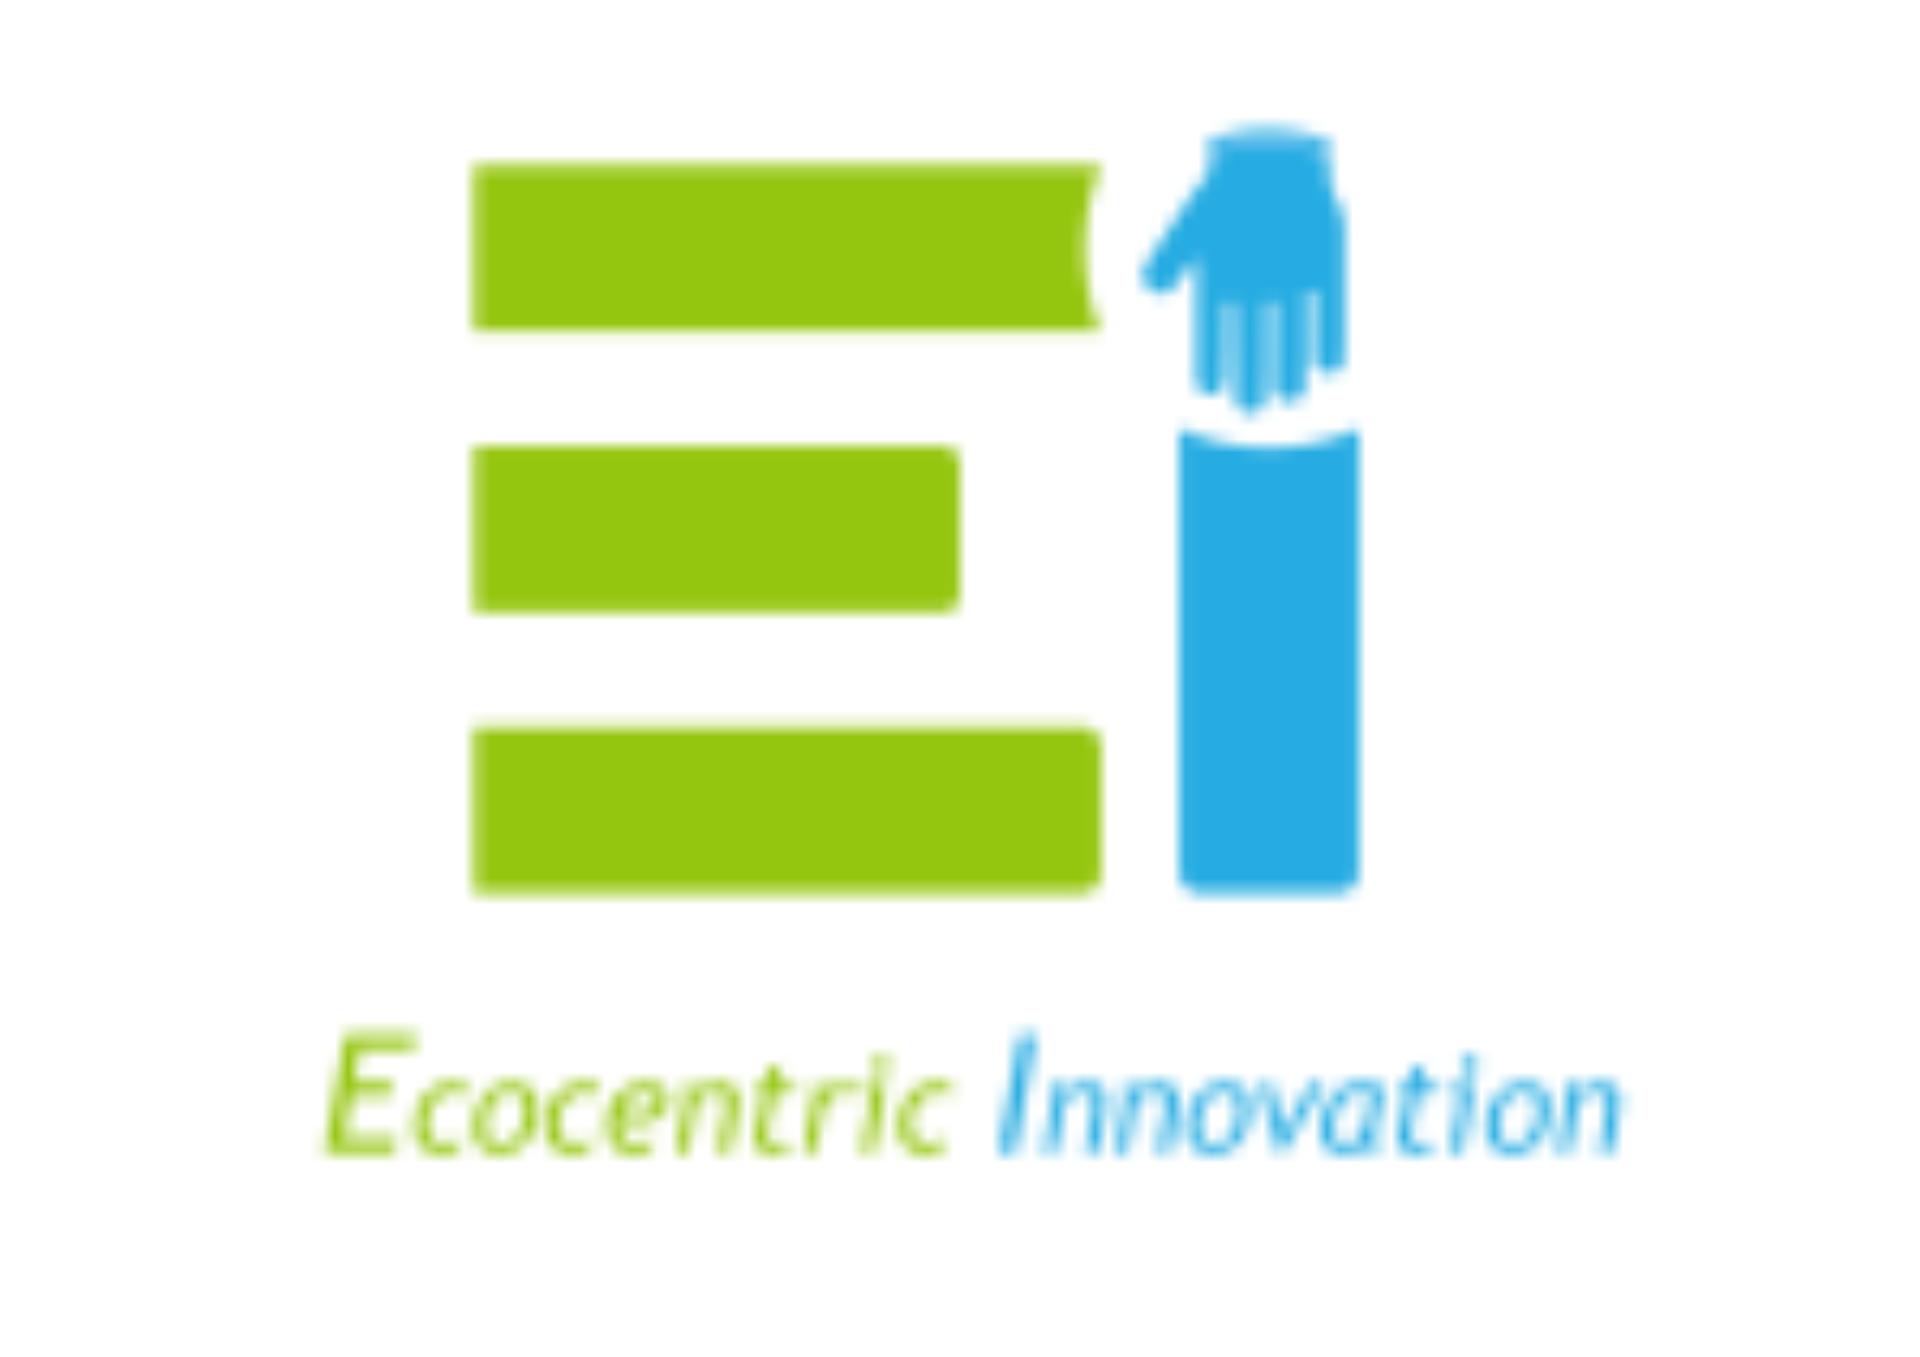 ECOCENTRIC INNOVATION AS